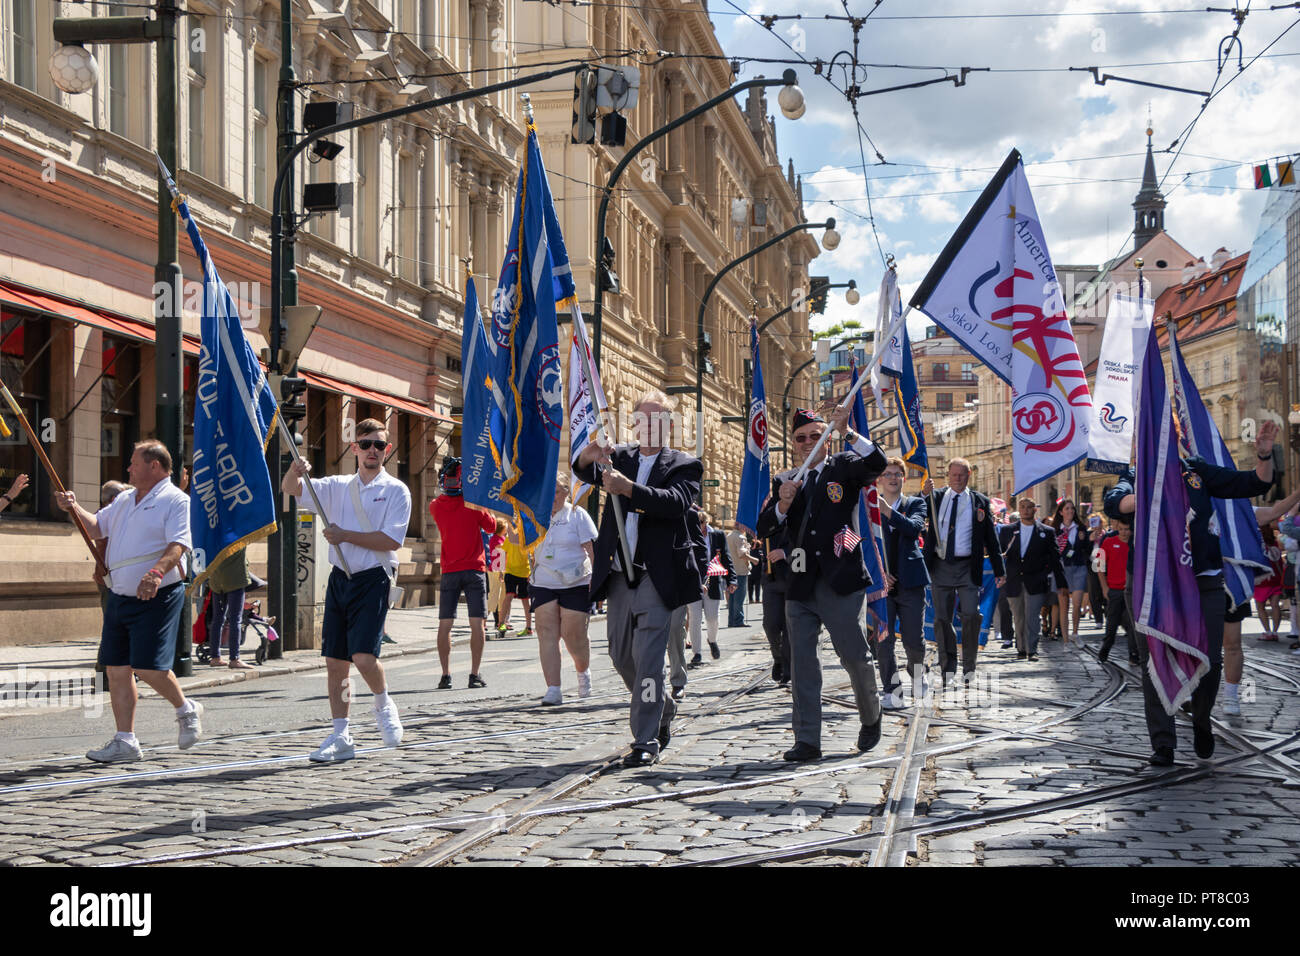 PRAGUE, CZECH REPUBLIC - JULY 1, 2018: American visitors parading at Sokolsky Slet, a once-every-six-years gathering of the Sokol movement - a Czech s Stock Photo